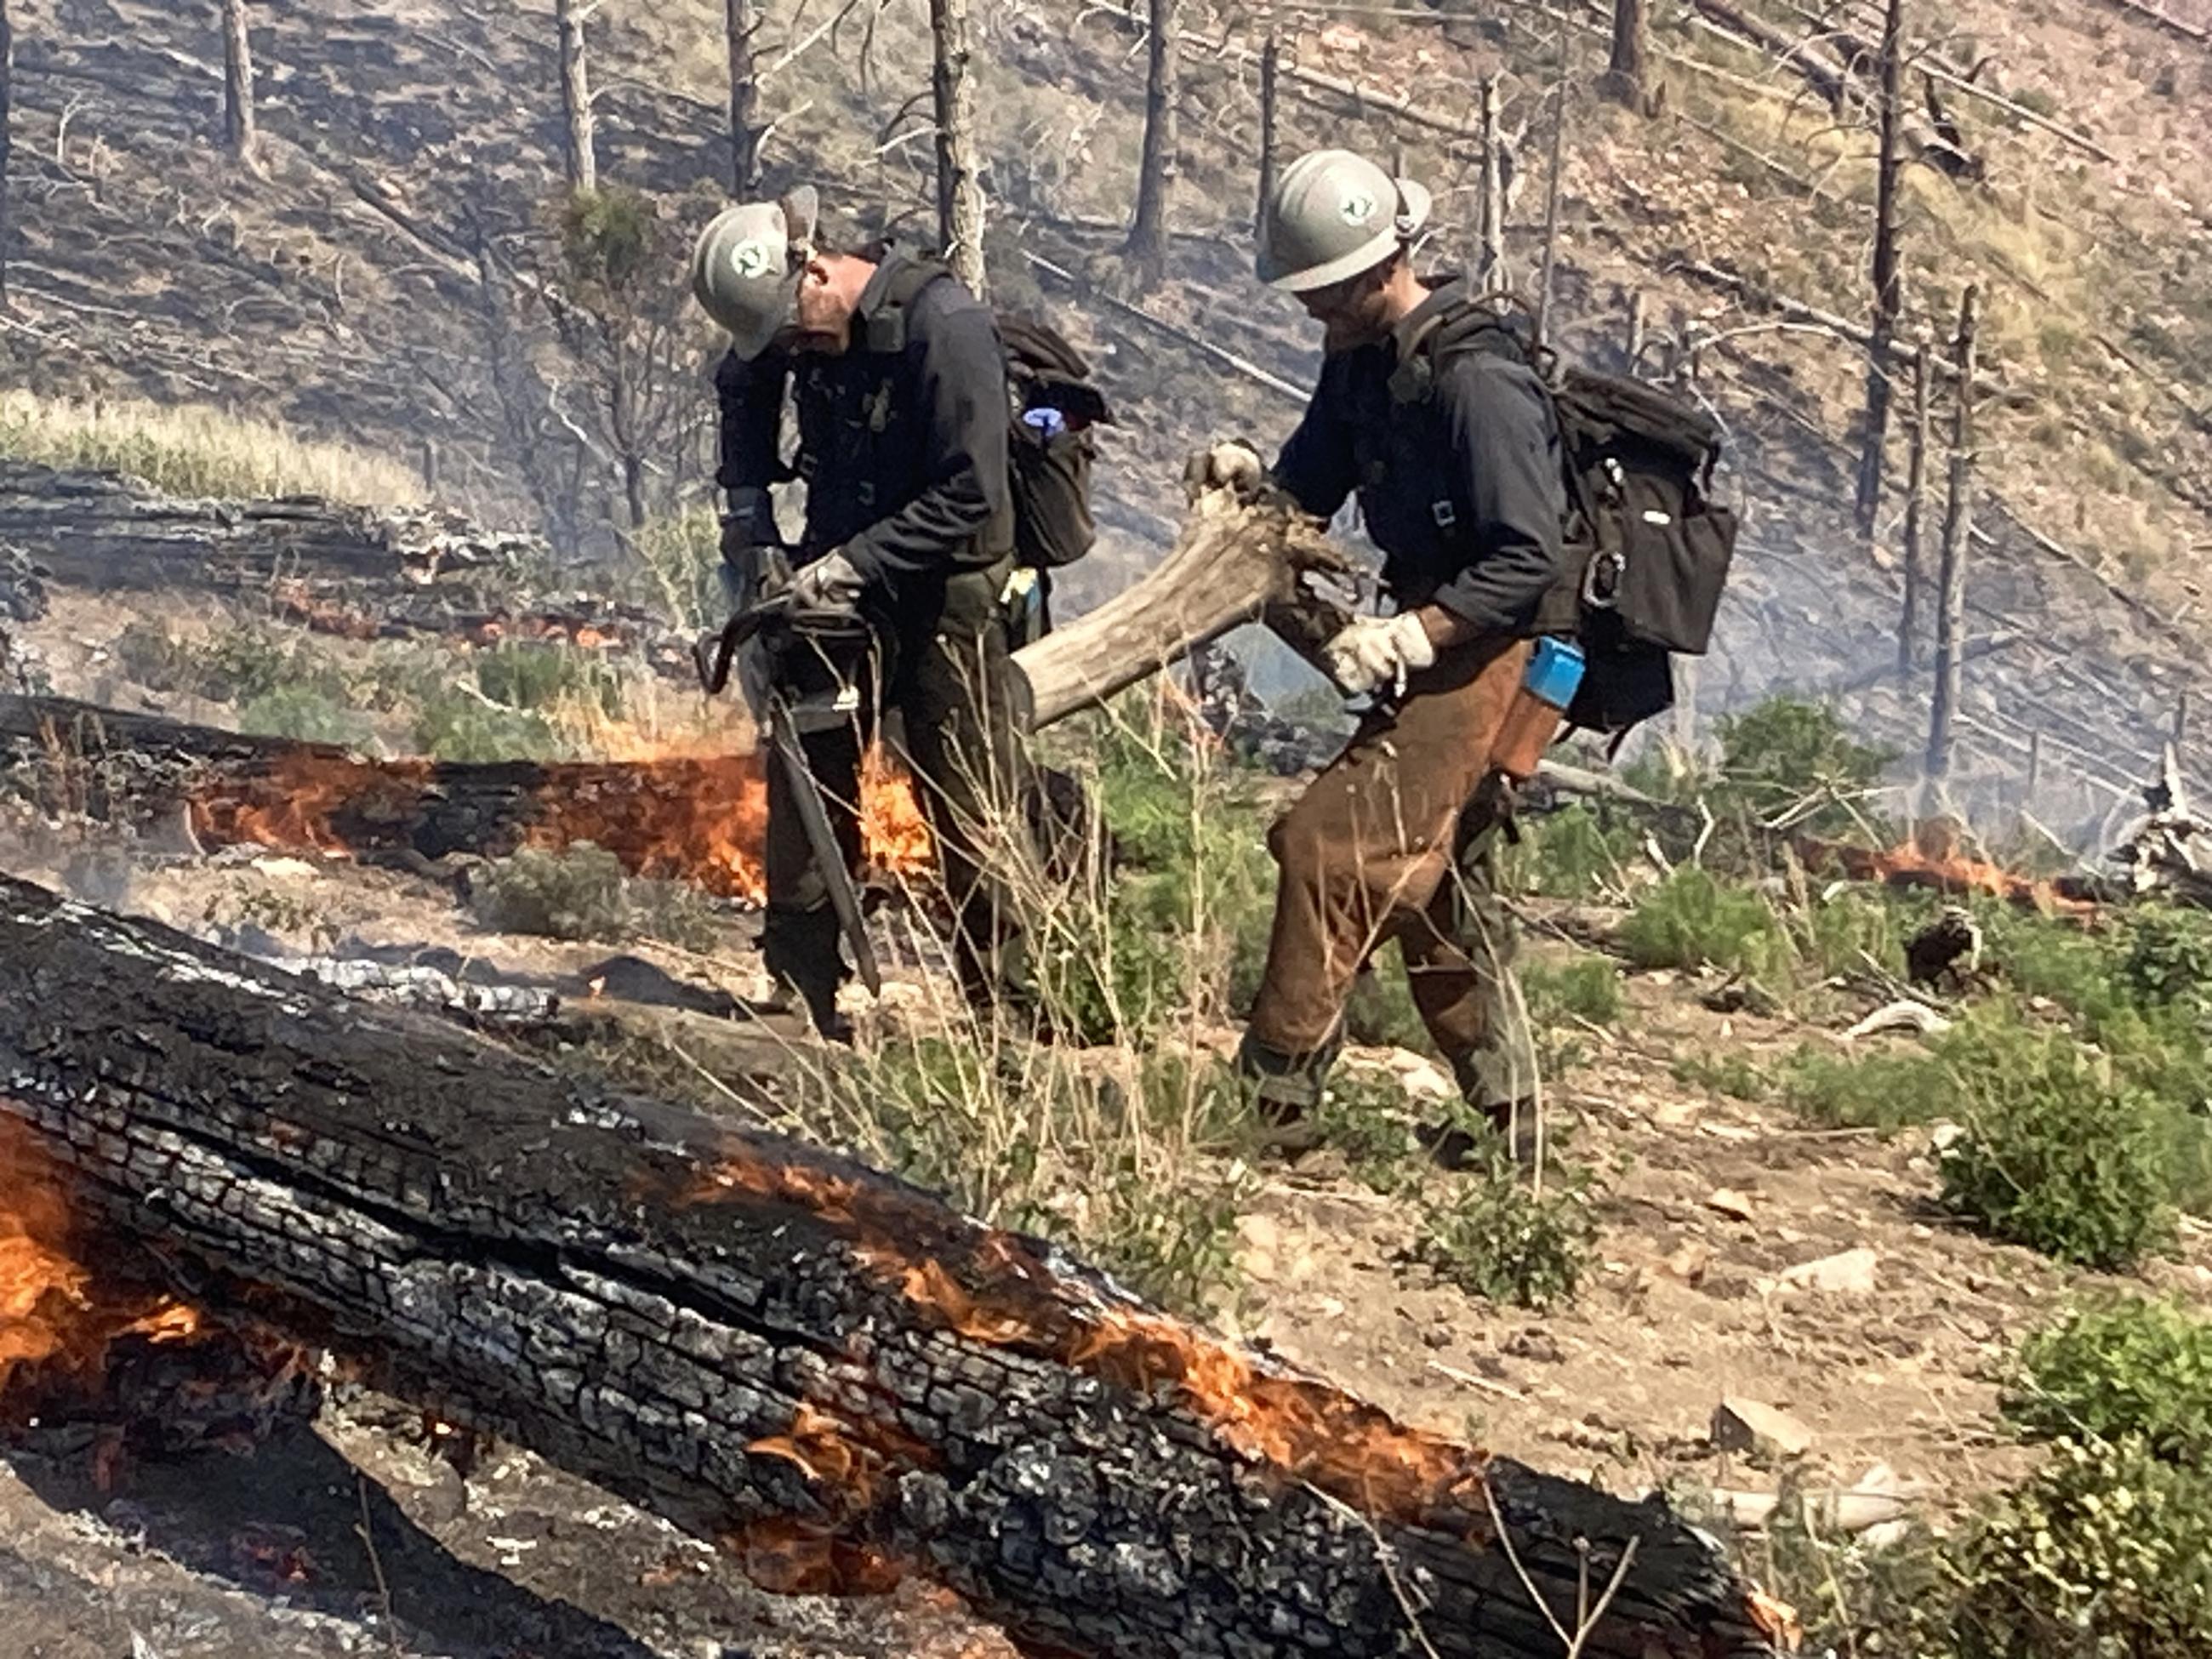 Firefighters remove debris using chainsaws in a wildfire. 